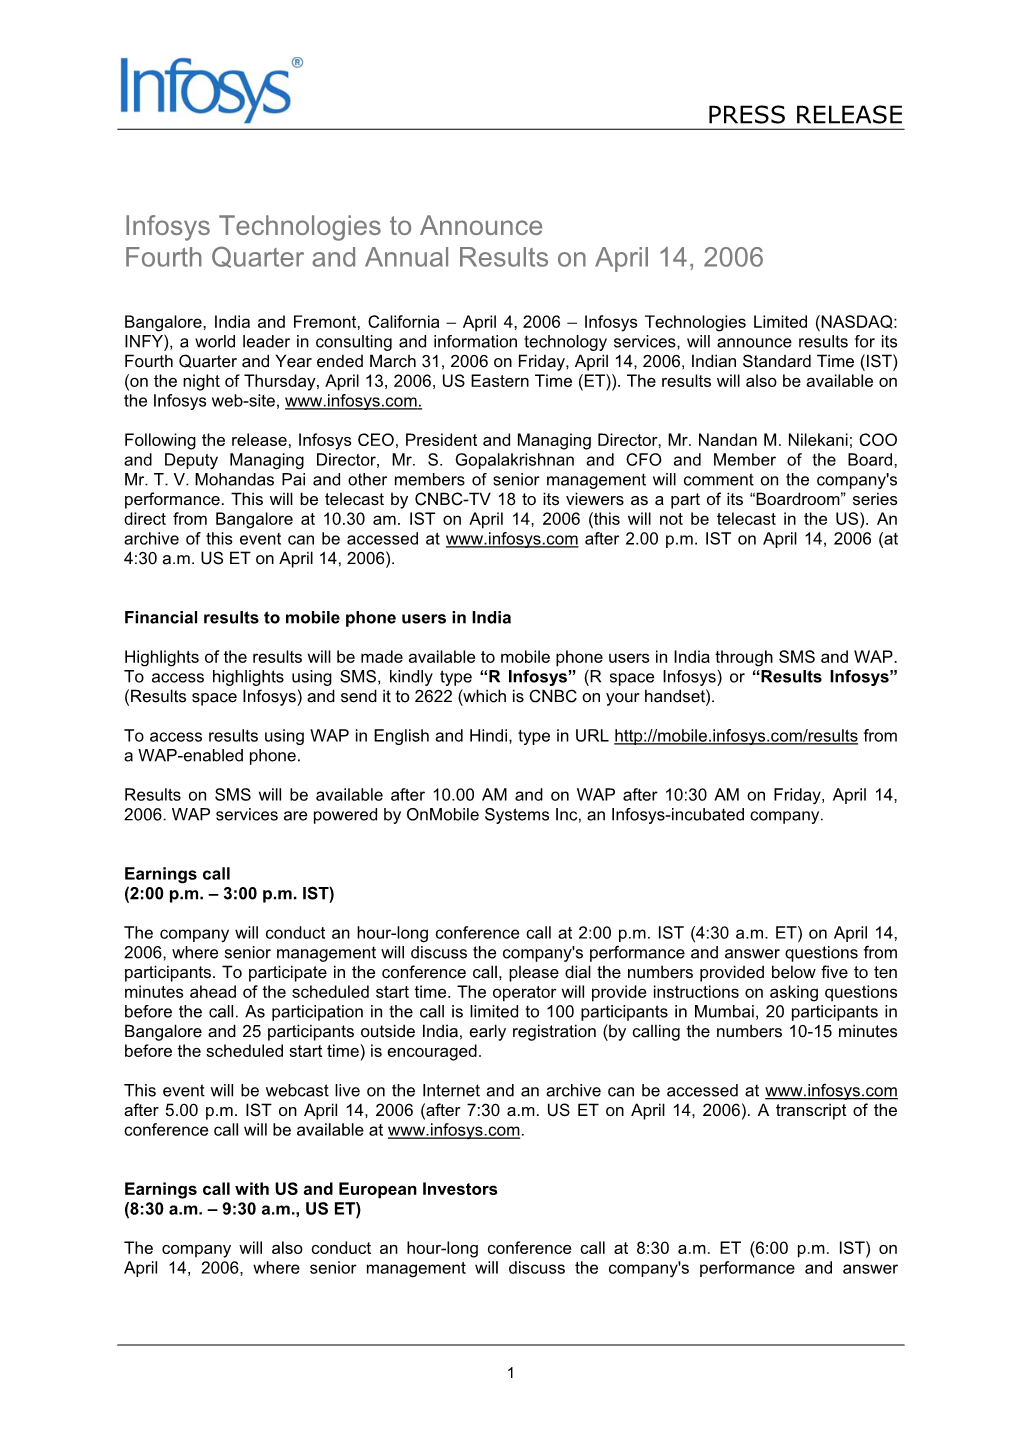 Infosys Technologies to Announce Fourth Quarter and Annual Results on April 14, 2006